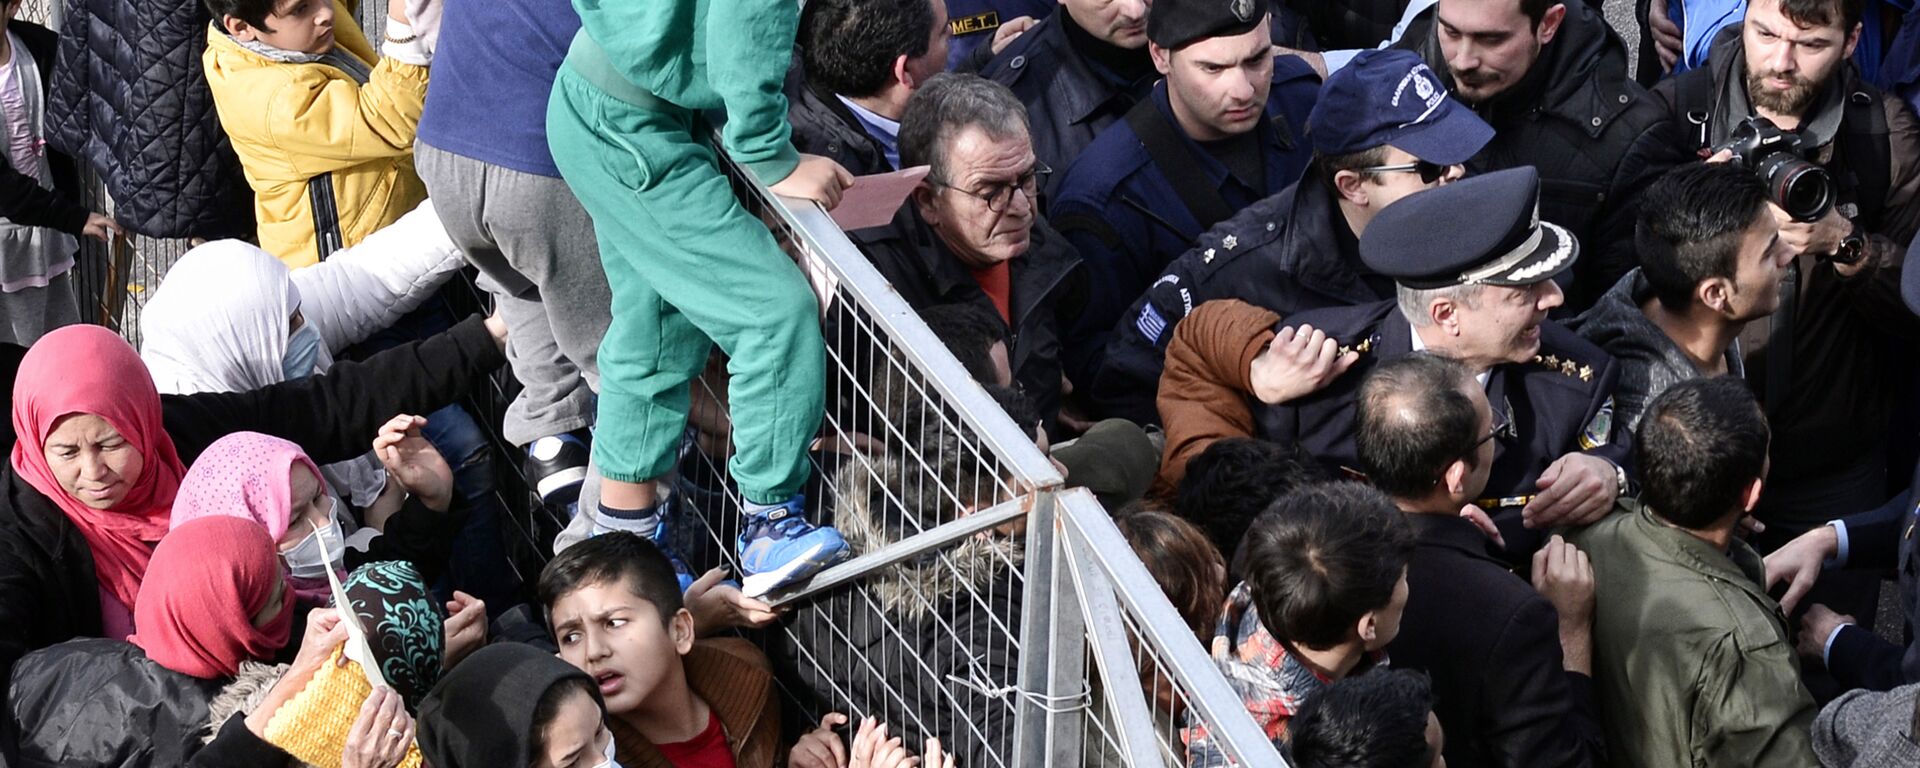 Migrants block the entrance of the Hellinikon camp in Athens in protest at poor living conditions on February 6, 2017 - Sputnik International, 1920